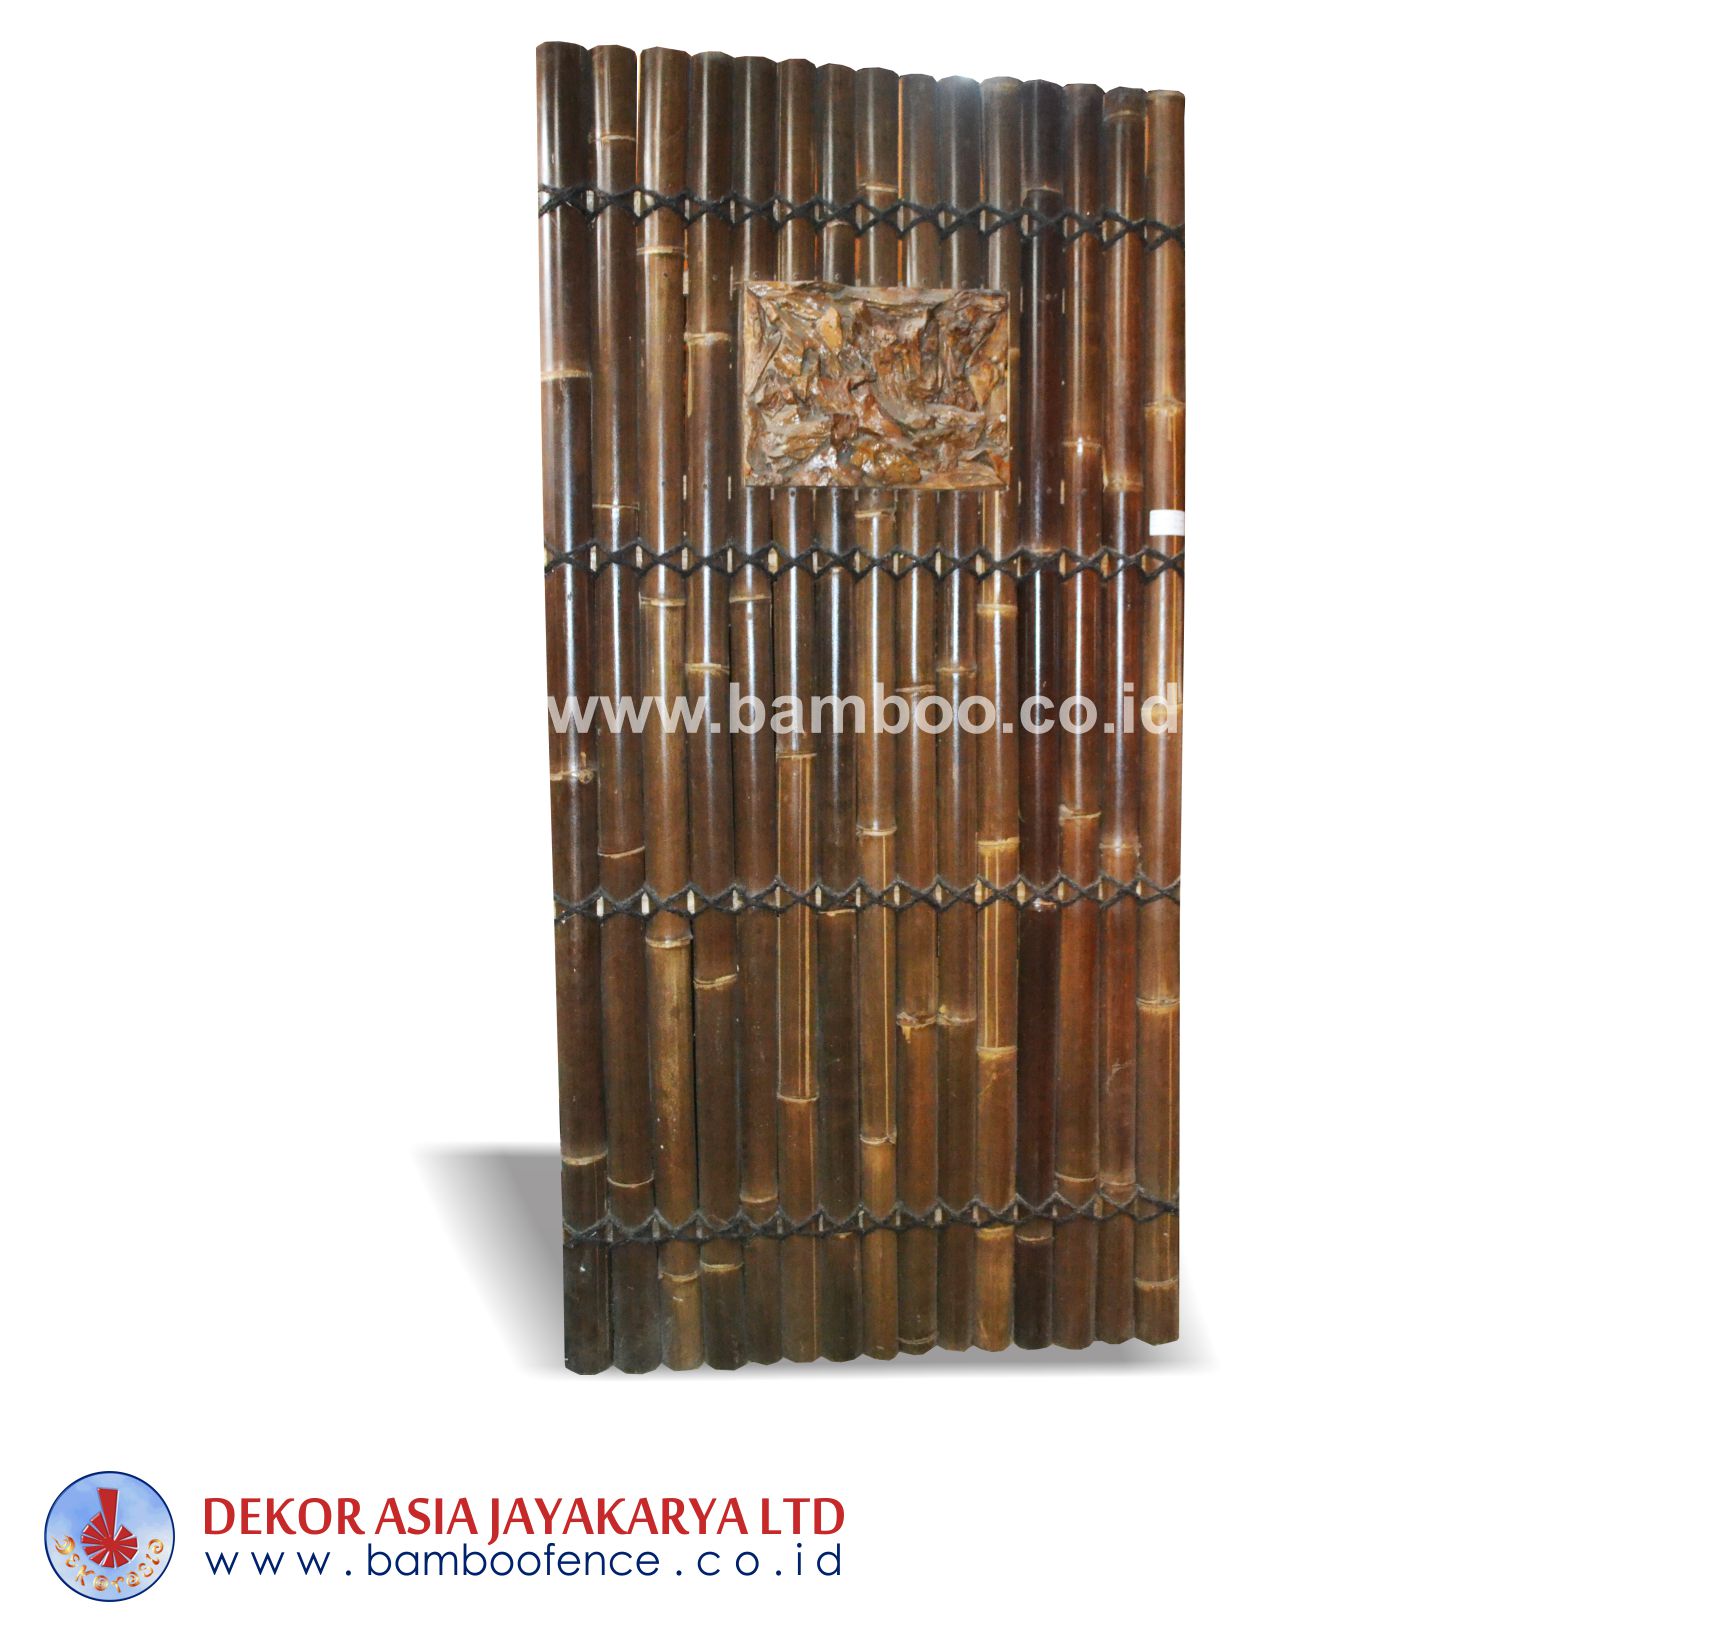 Half Cut Bamboo Fence 4 Blades Back, Black Coco Strap Wood Carving